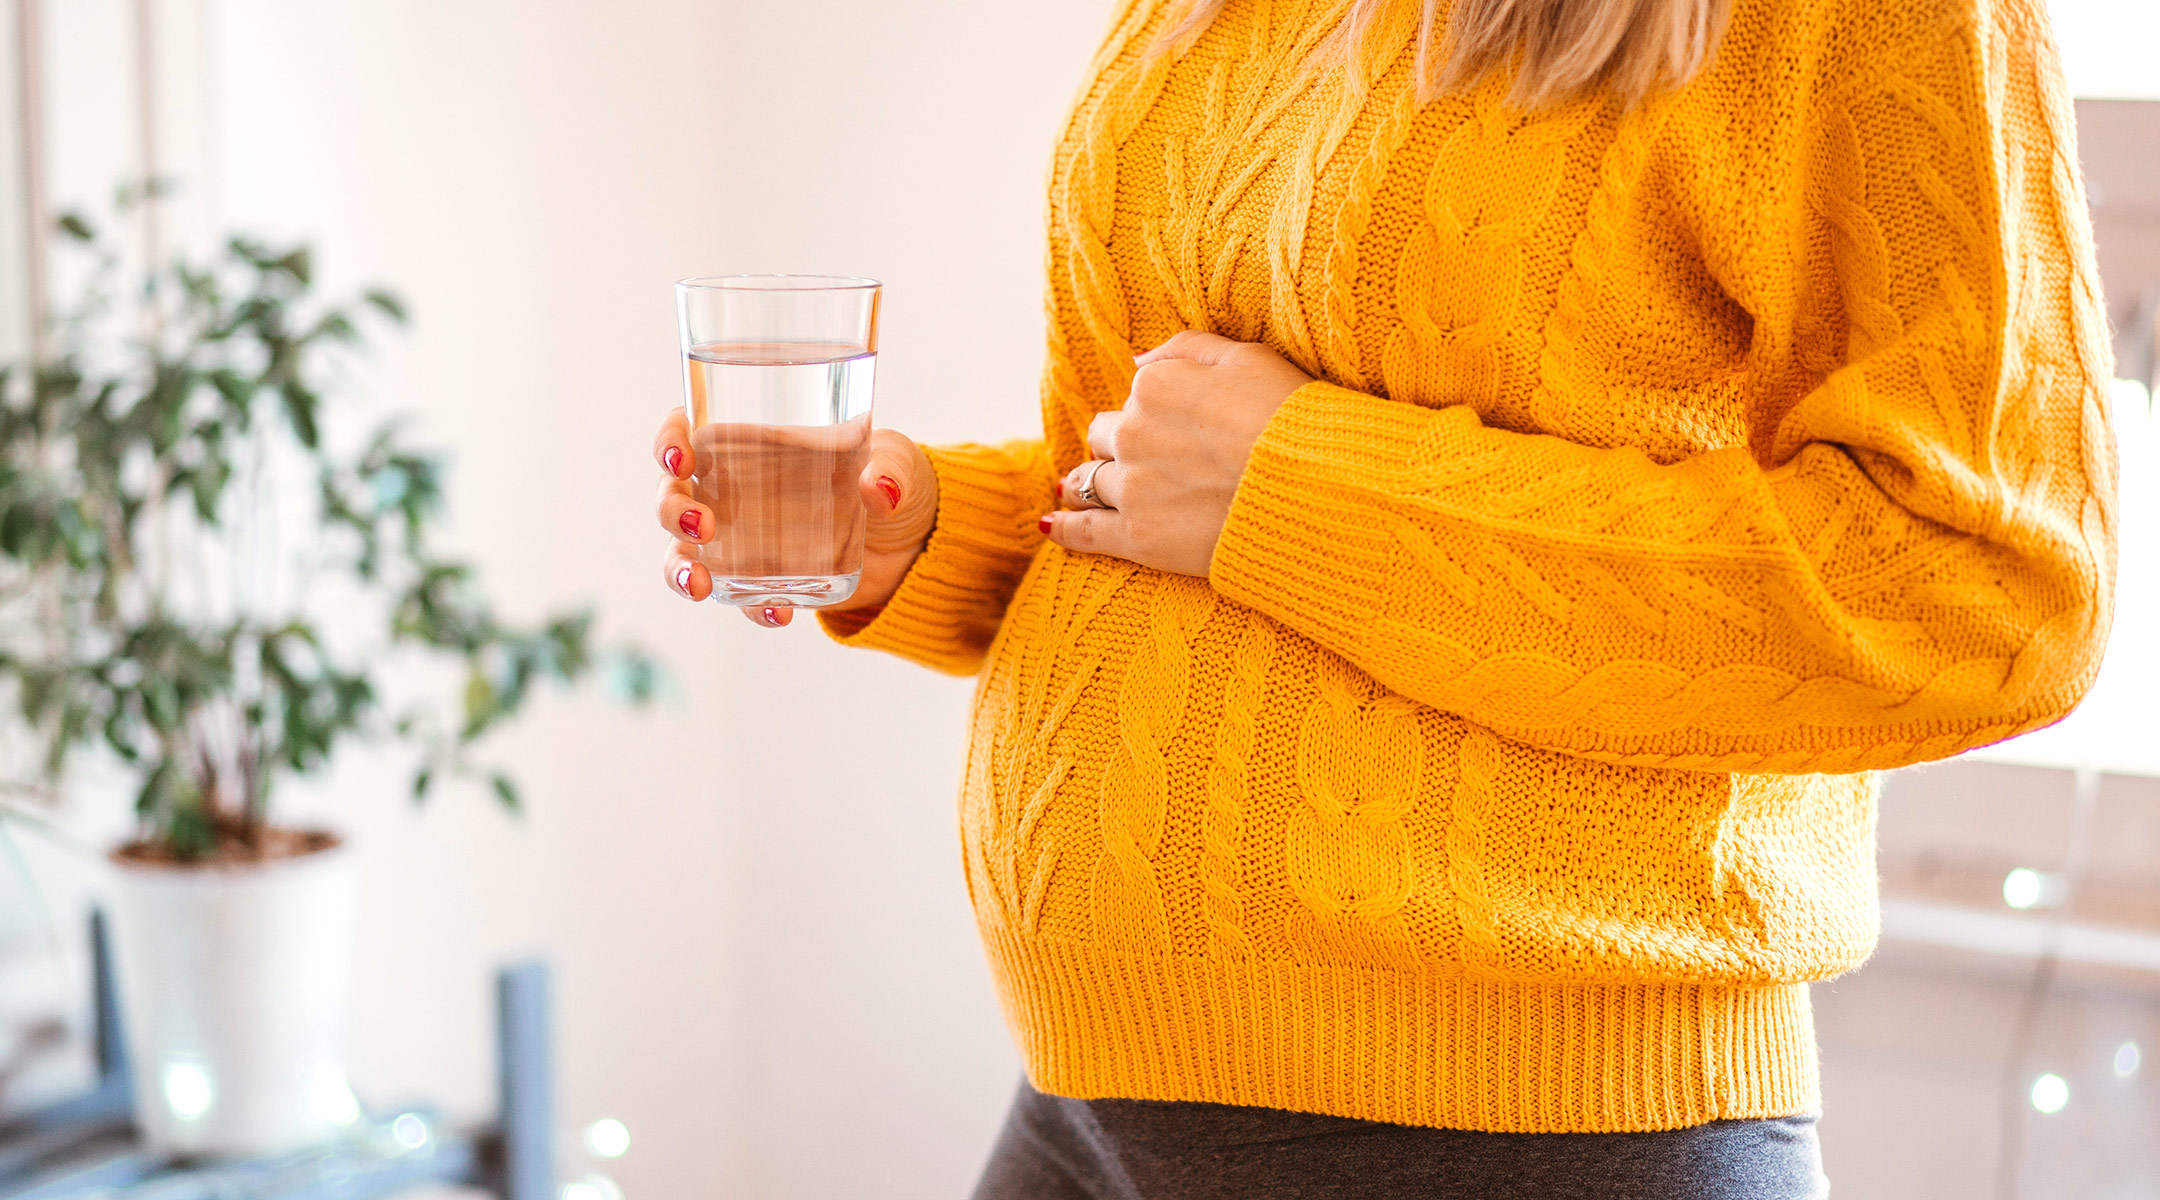 pregnant woman drinking glass of water